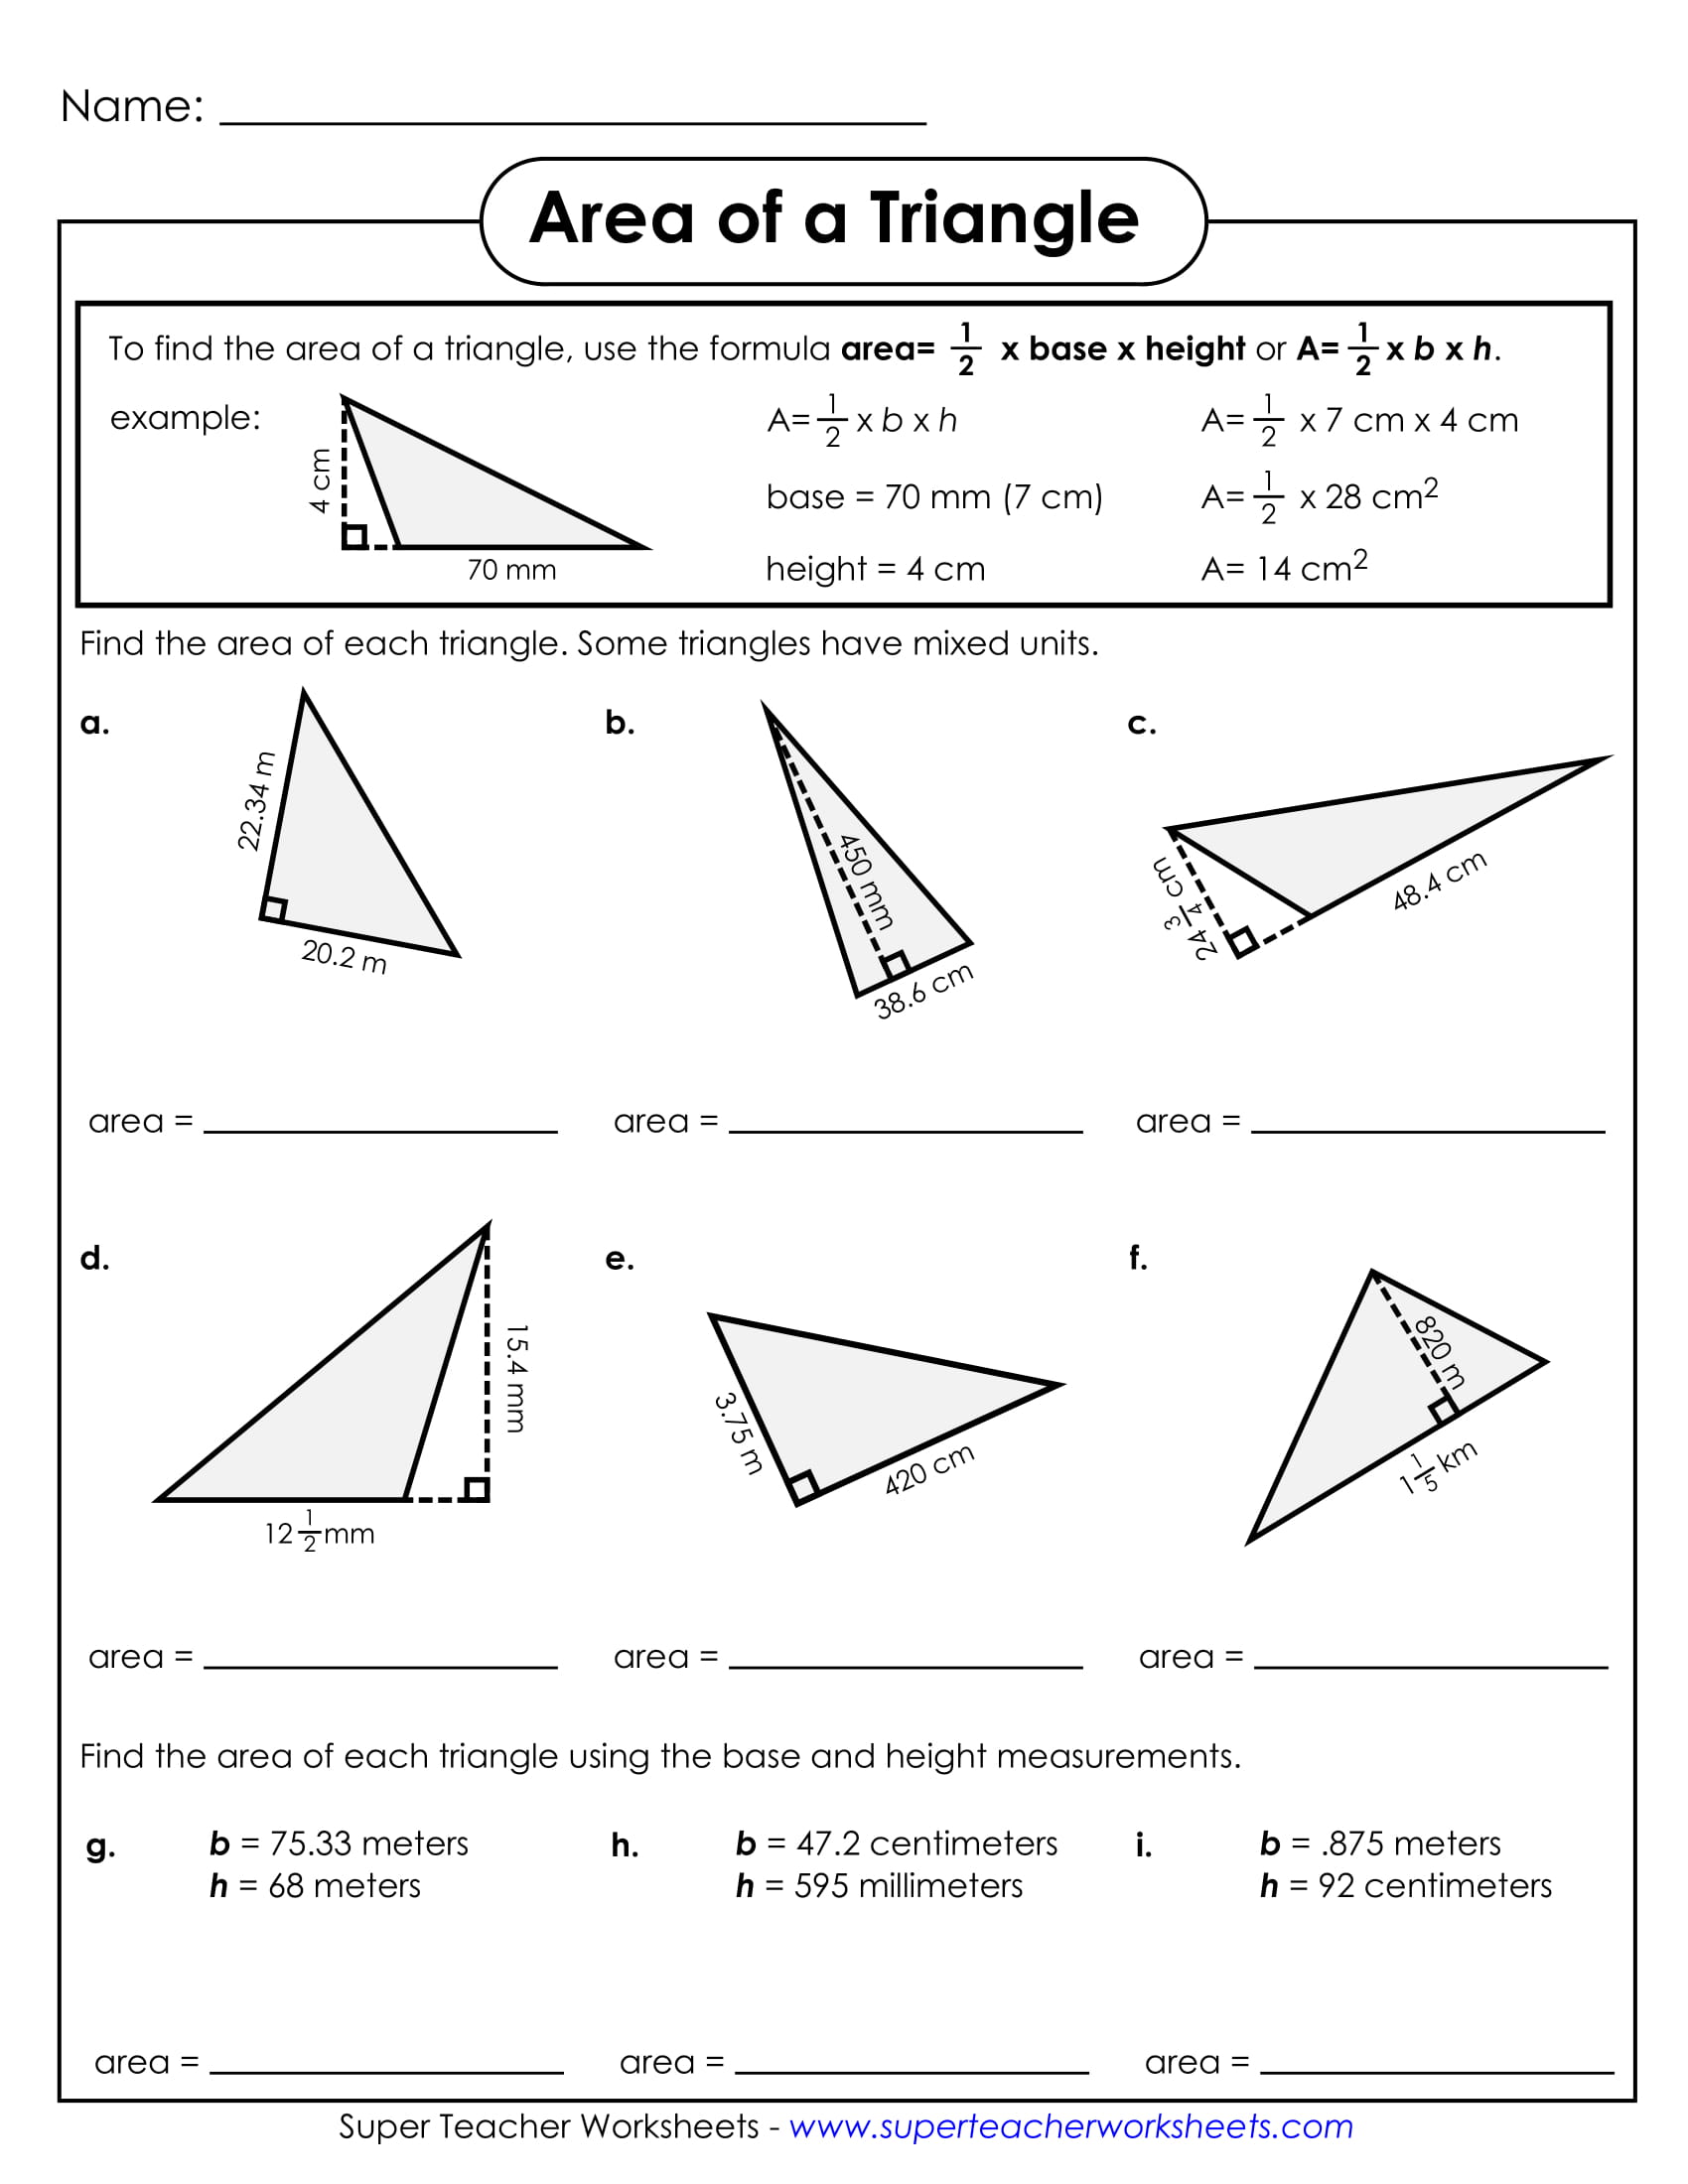 20+ Geometry Worksheet Examples for Students - PDF  Examples Inside Area Of A Triangle Worksheet